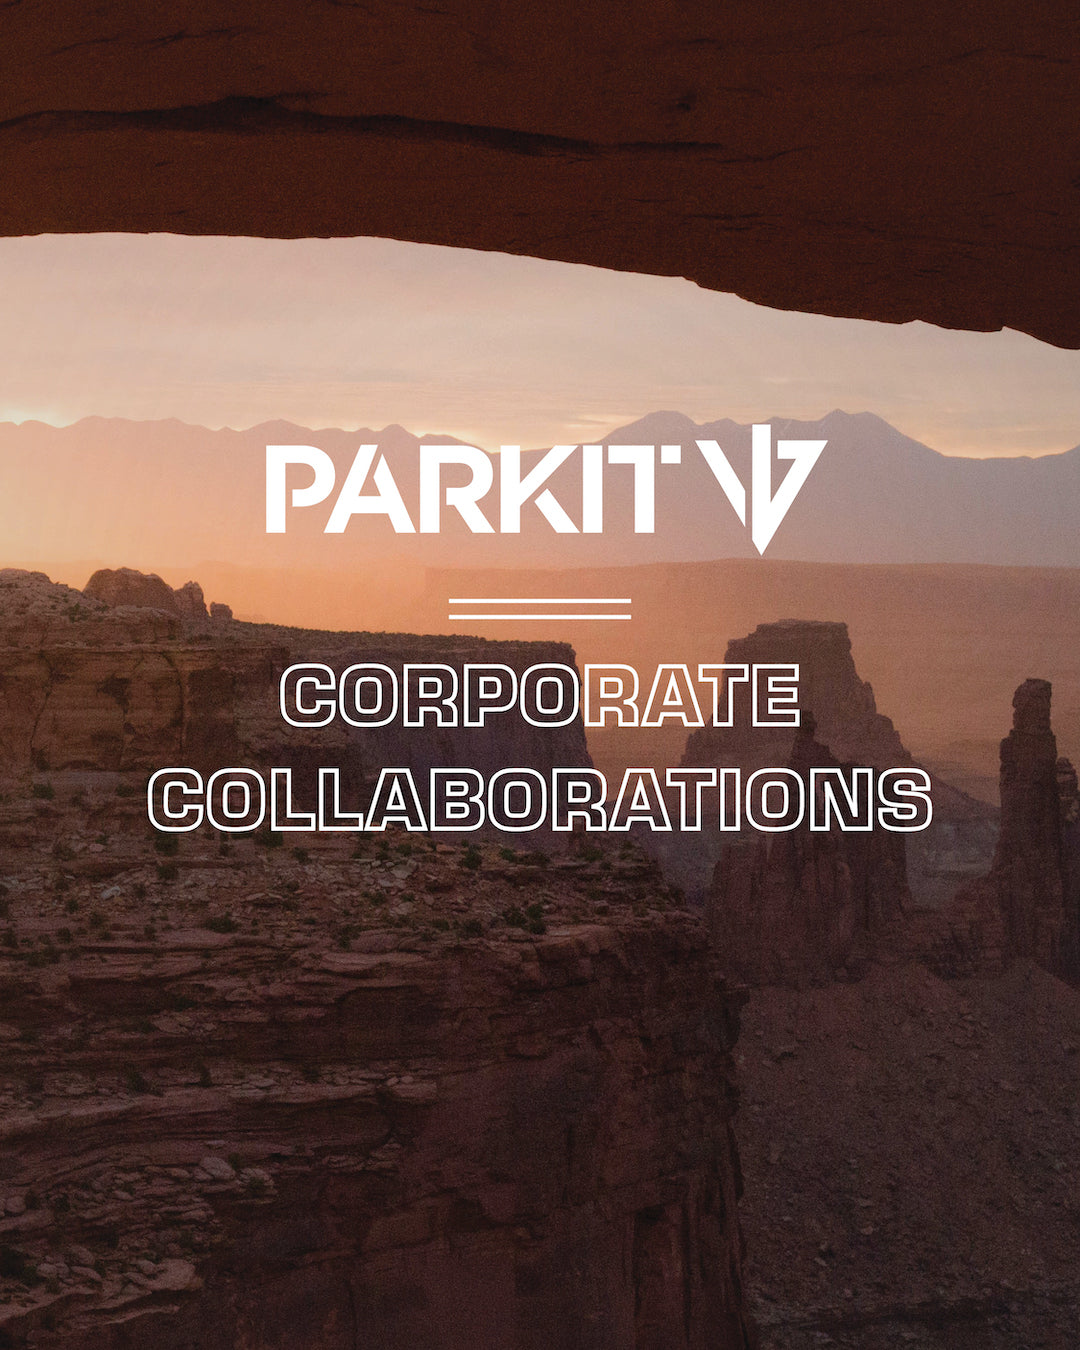 PARKIT CORPORATE COLLABORATIONS WITH A SUNSET AND BRYCE CANYON IN THE BACKGROUND